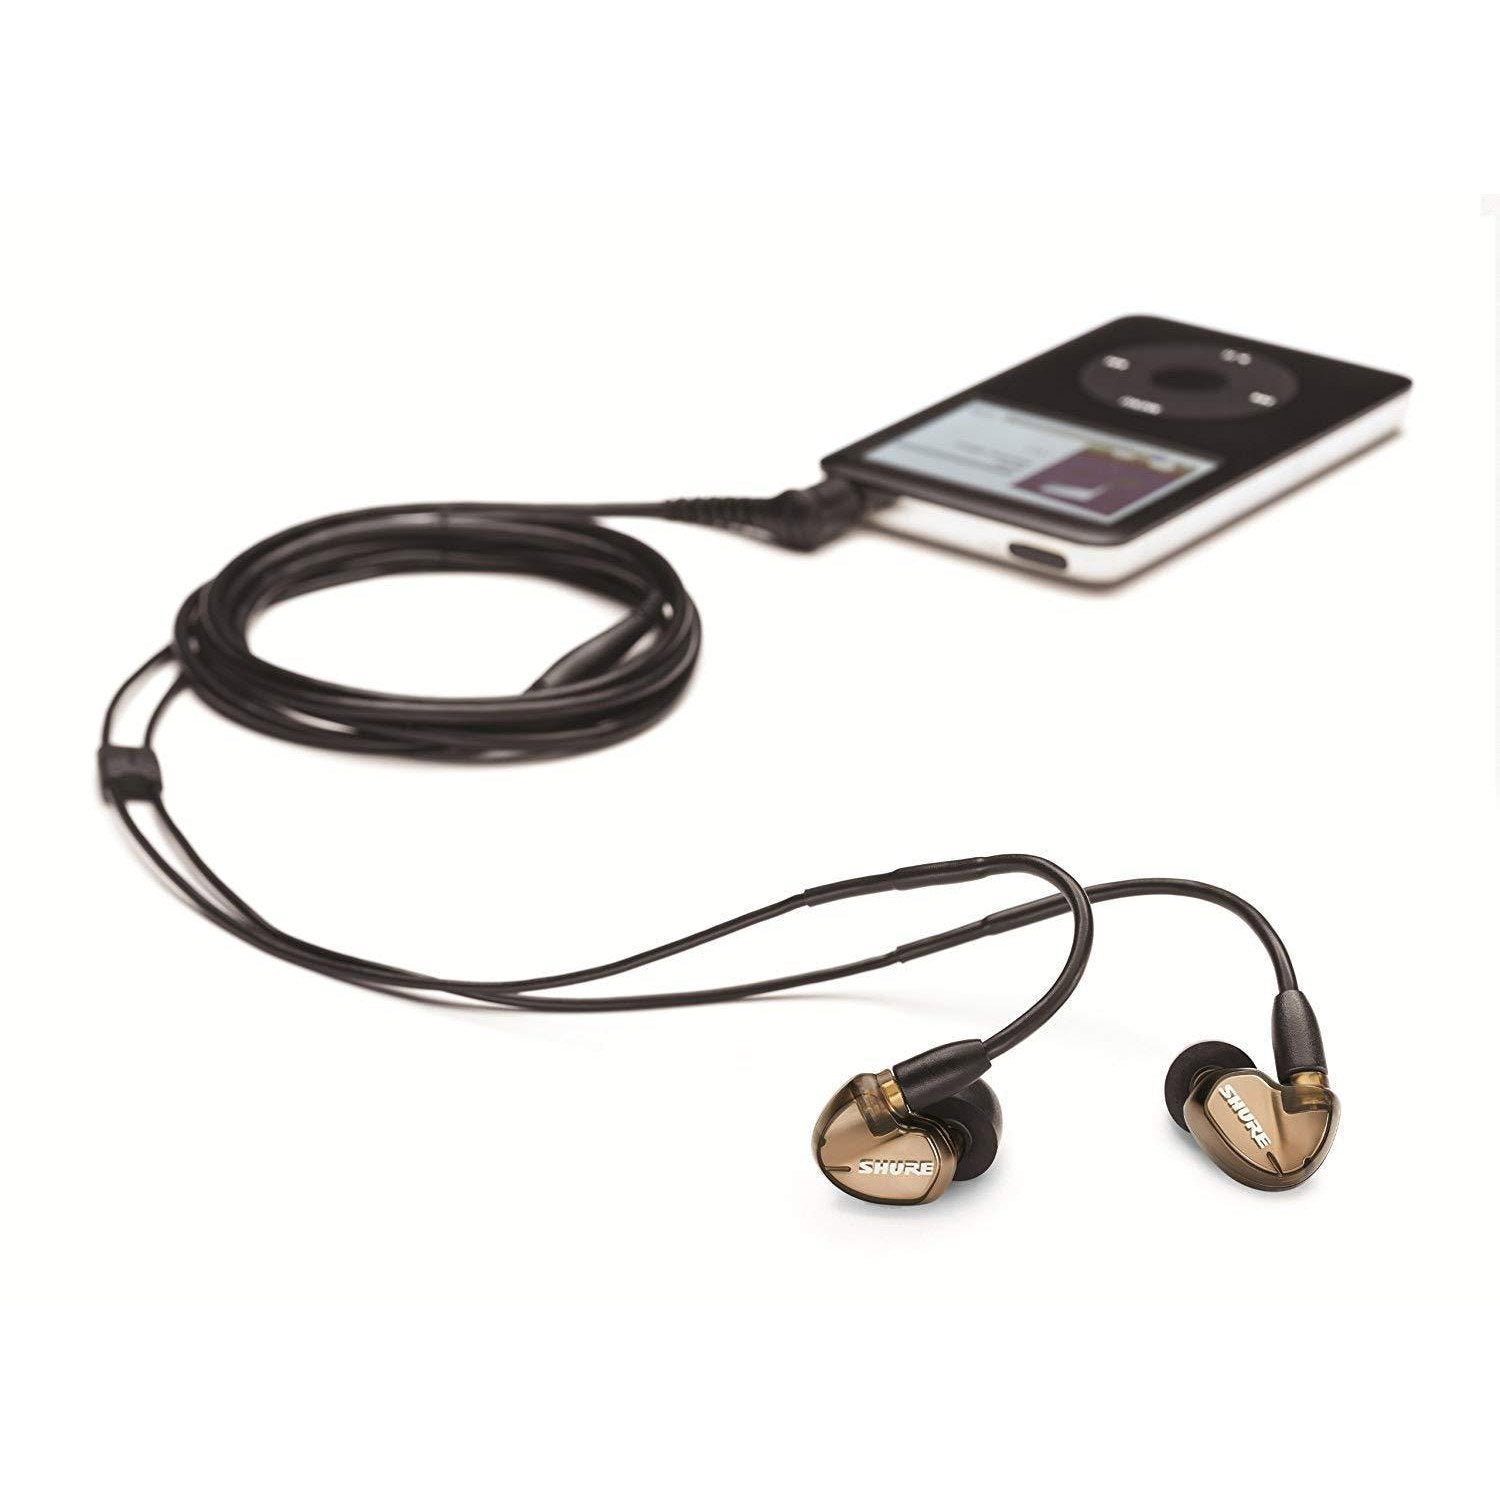 Shure SE535-V Sound Isolating Earphones with Triple High Definition MicroDrivers